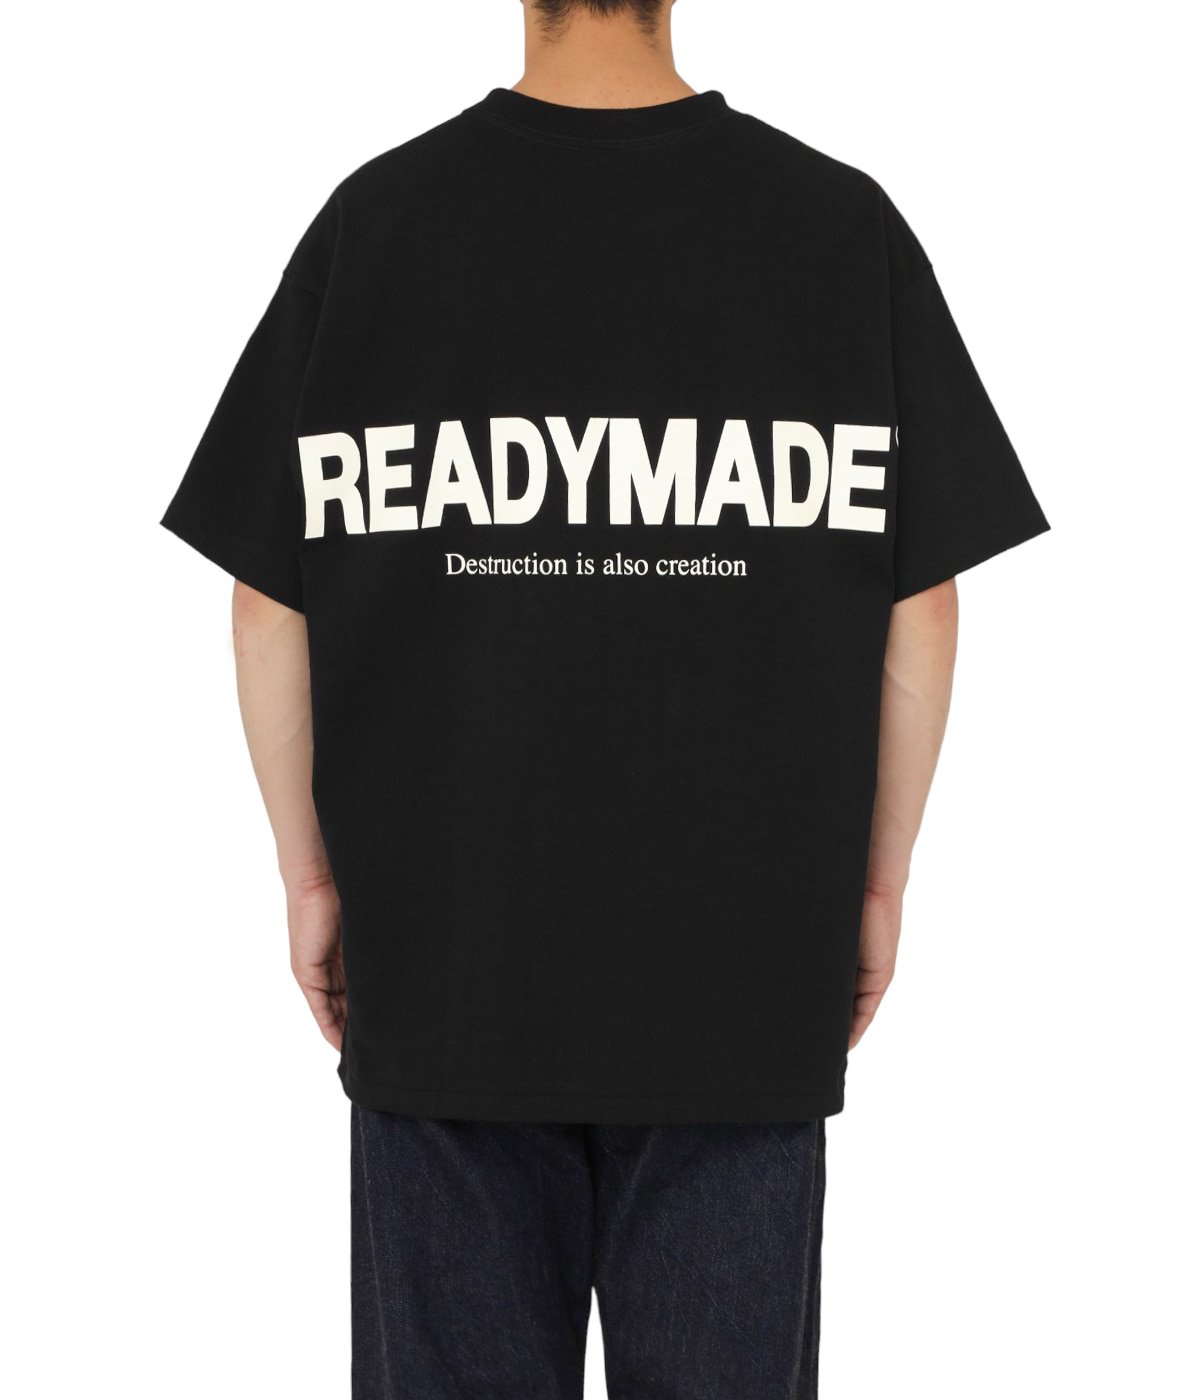 SS T-SHIRT SMILE | READYMADE(レディメイド) / トップス カットソー